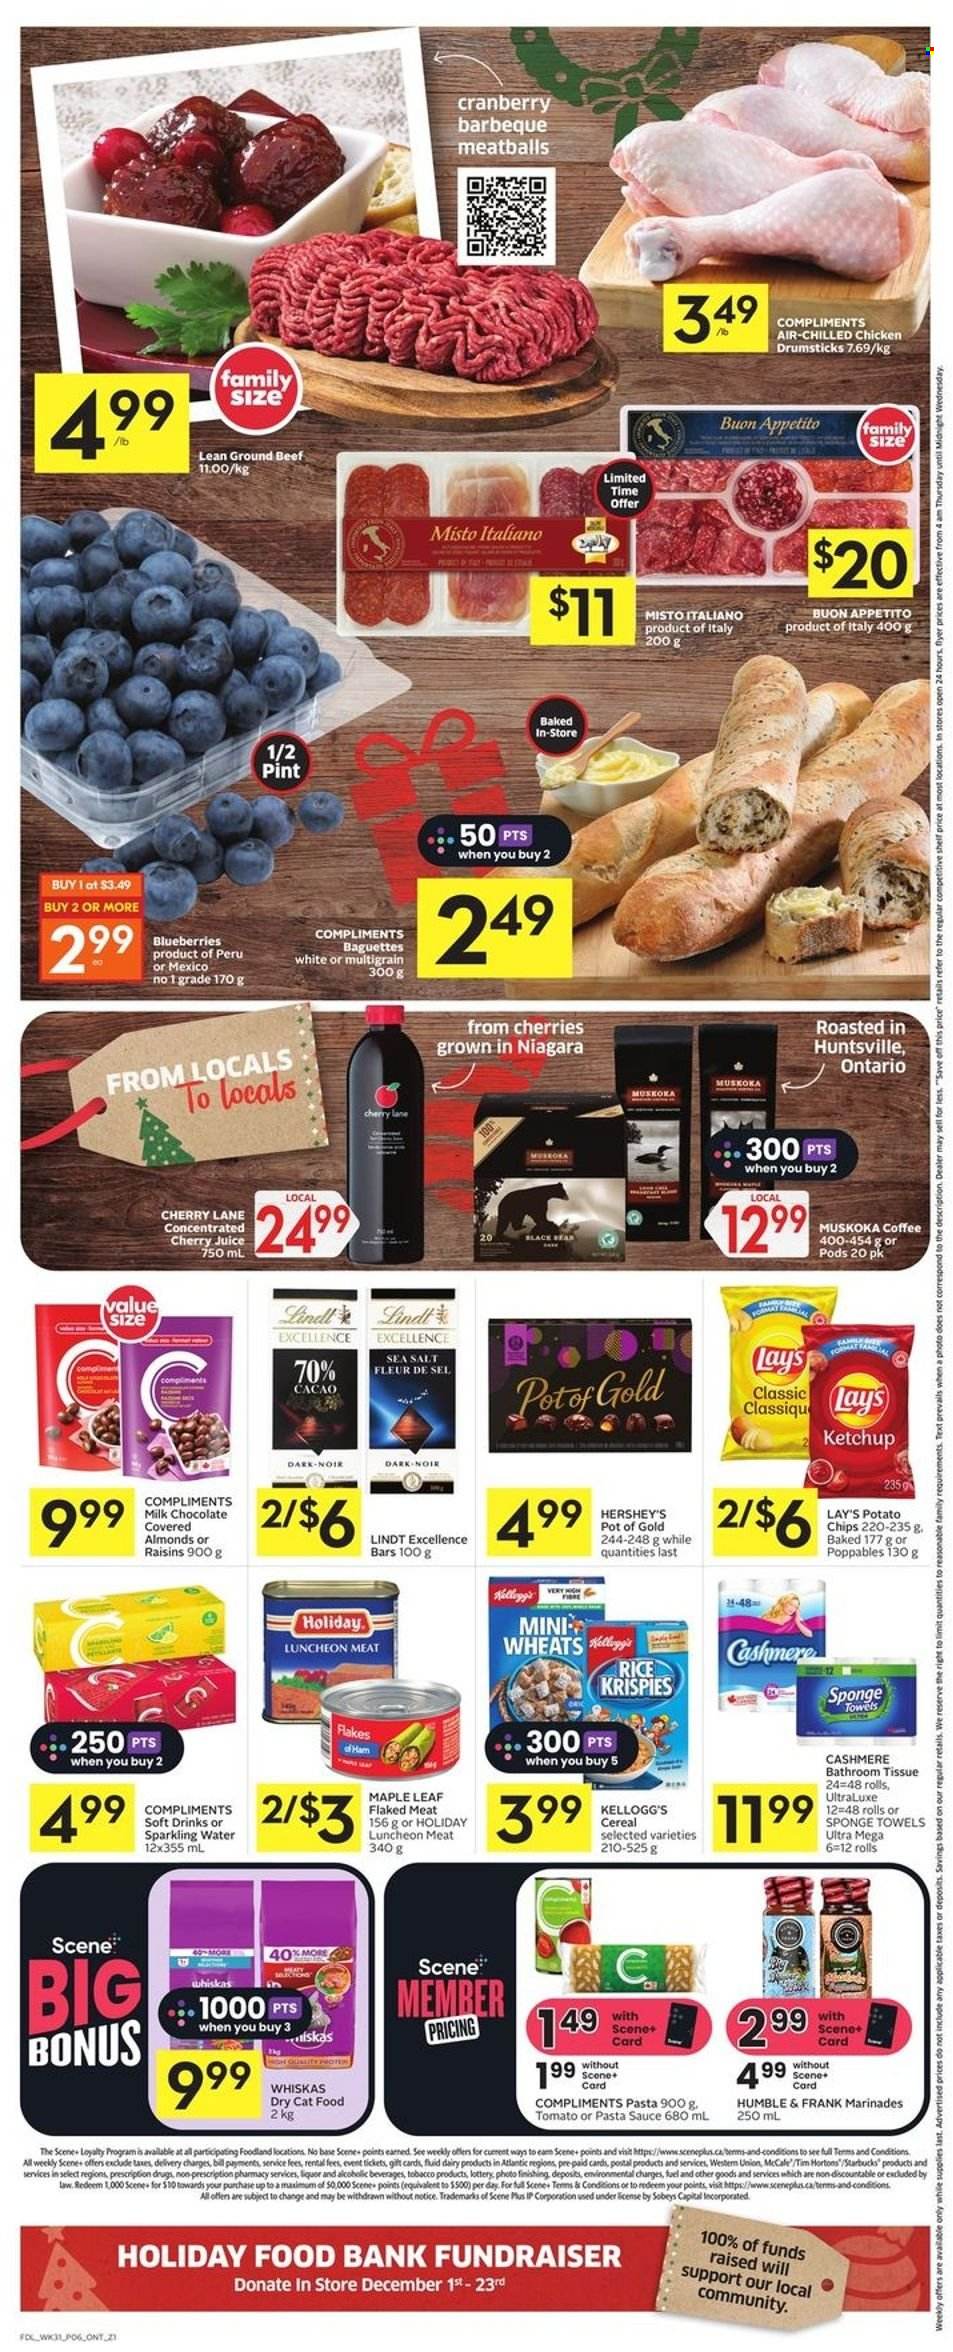 thumbnail - Foodland Flyer - December 01, 2022 - December 07, 2022 - Sales products - blueberries, cherries, pasta sauce, meatballs, ham, lunch meat, Hershey's, milk chocolate, Kellogg's, potato chips, chips, Lay’s, cereals, Rice Krispies, almonds, cherry juice, juice, soft drink, sparkling water, coffee, Starbucks, liquor, chicken drumsticks, chicken, beef meat, ground beef, bath tissue, animal food, cat food, dry cat food, pot, baguette, ketchup, Whiskas, Lindt. Page 7.